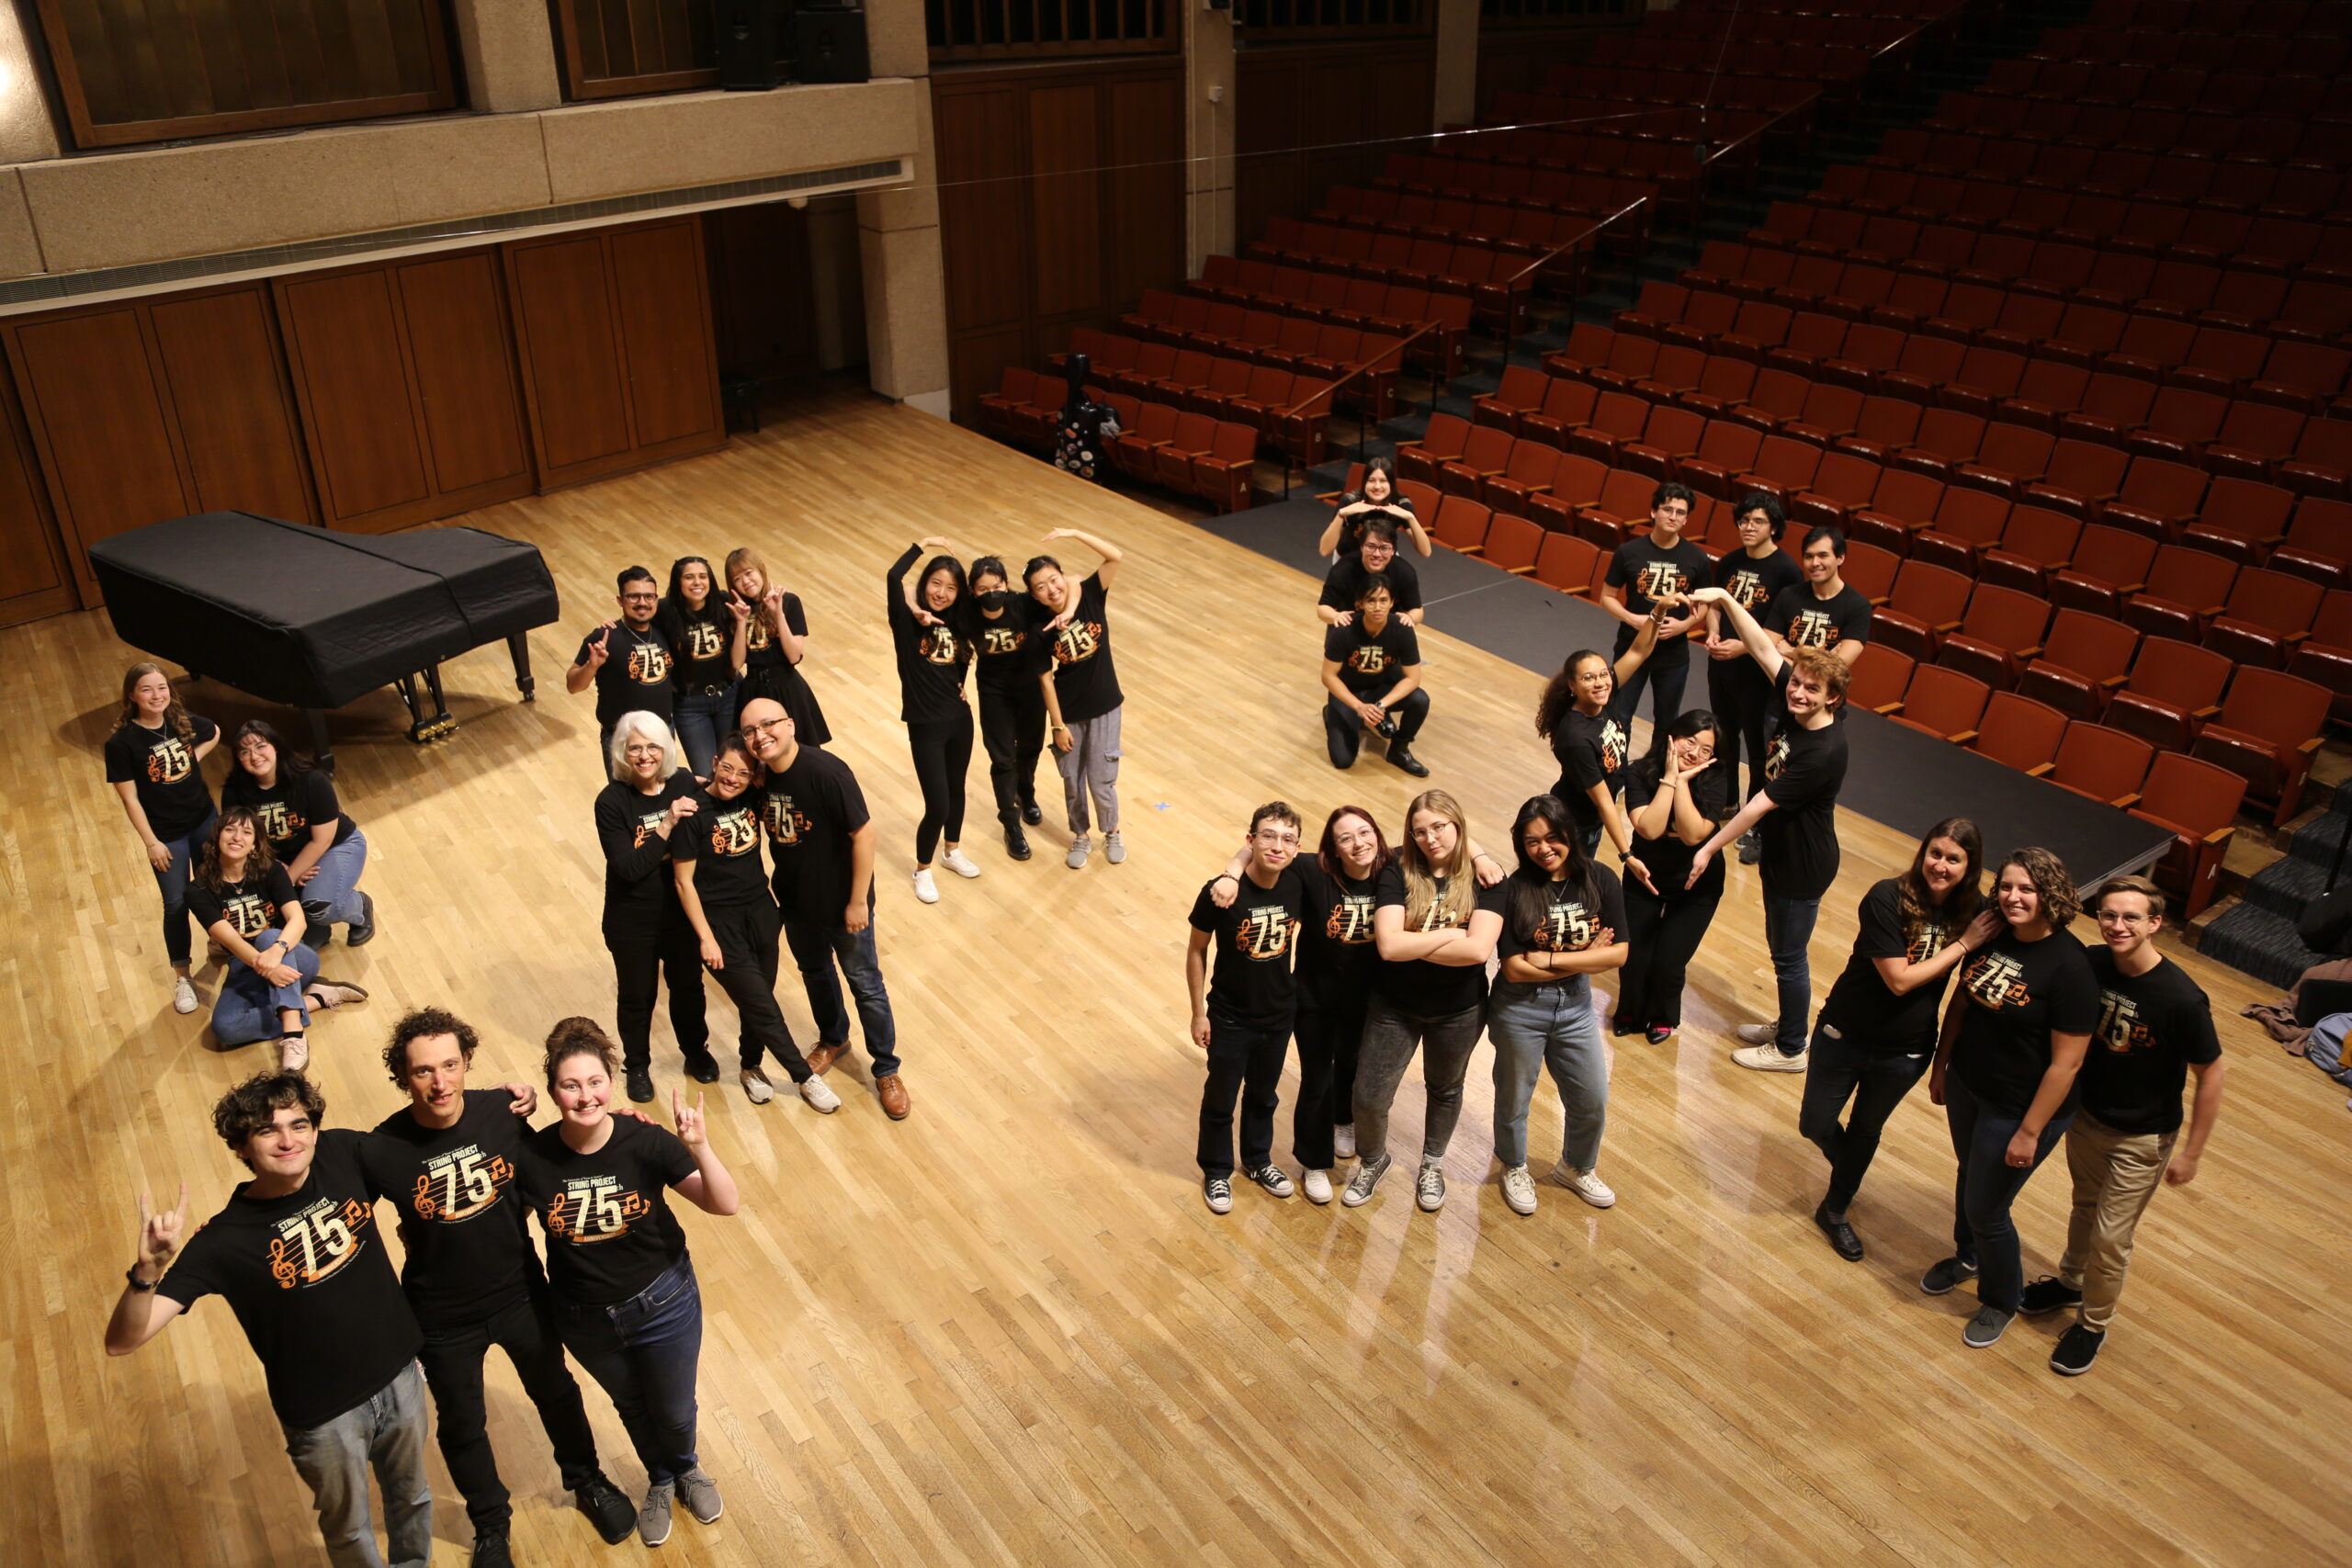 String Project students stand on stage with faculty in small groups. They're wearing 75th anniversary t-shirts.